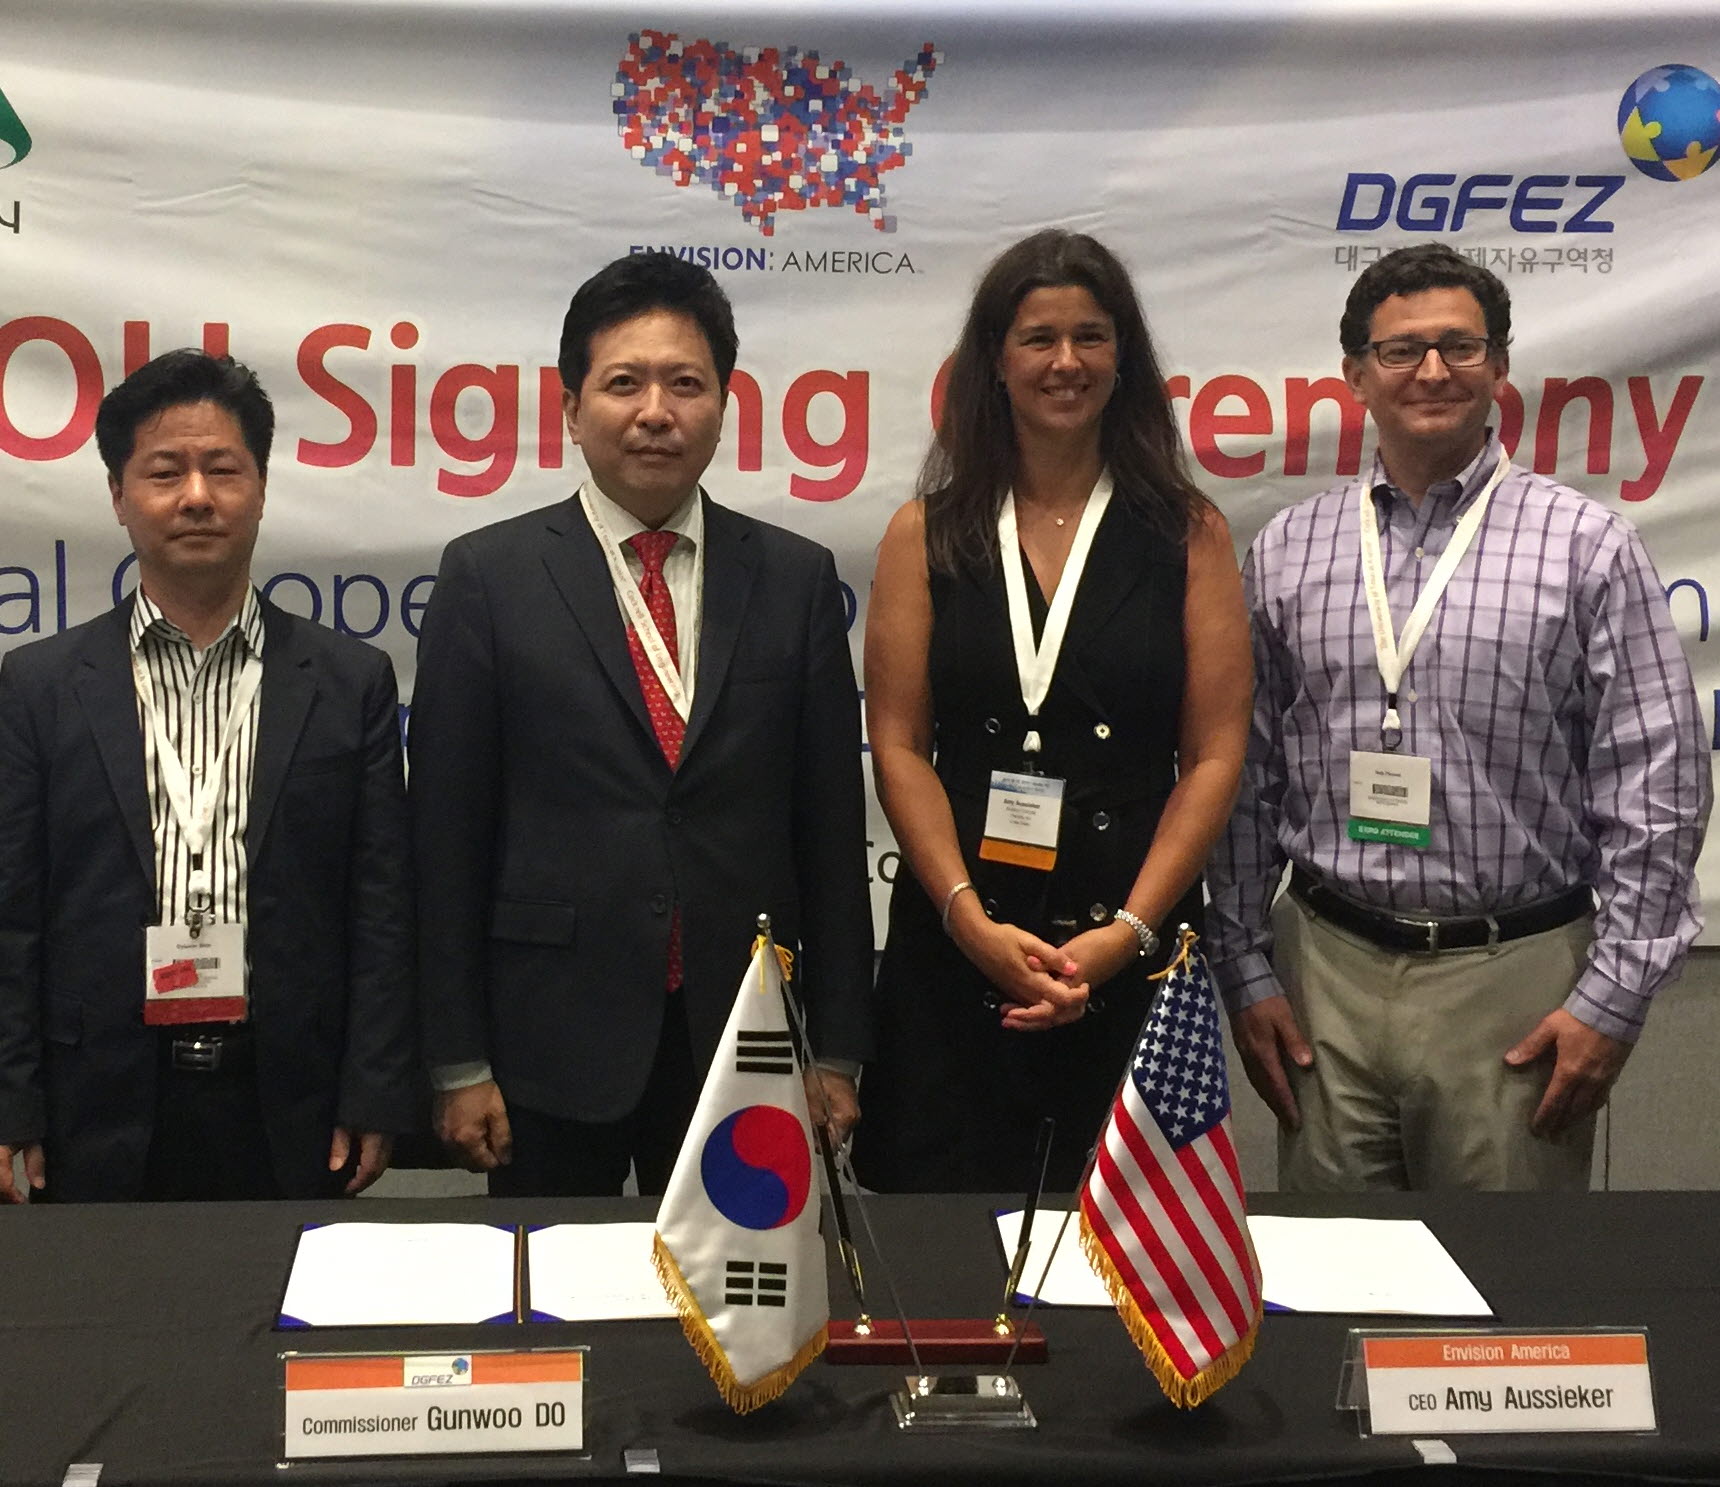 Leading Daegu to become a Smart City, signing MOU with Envis...